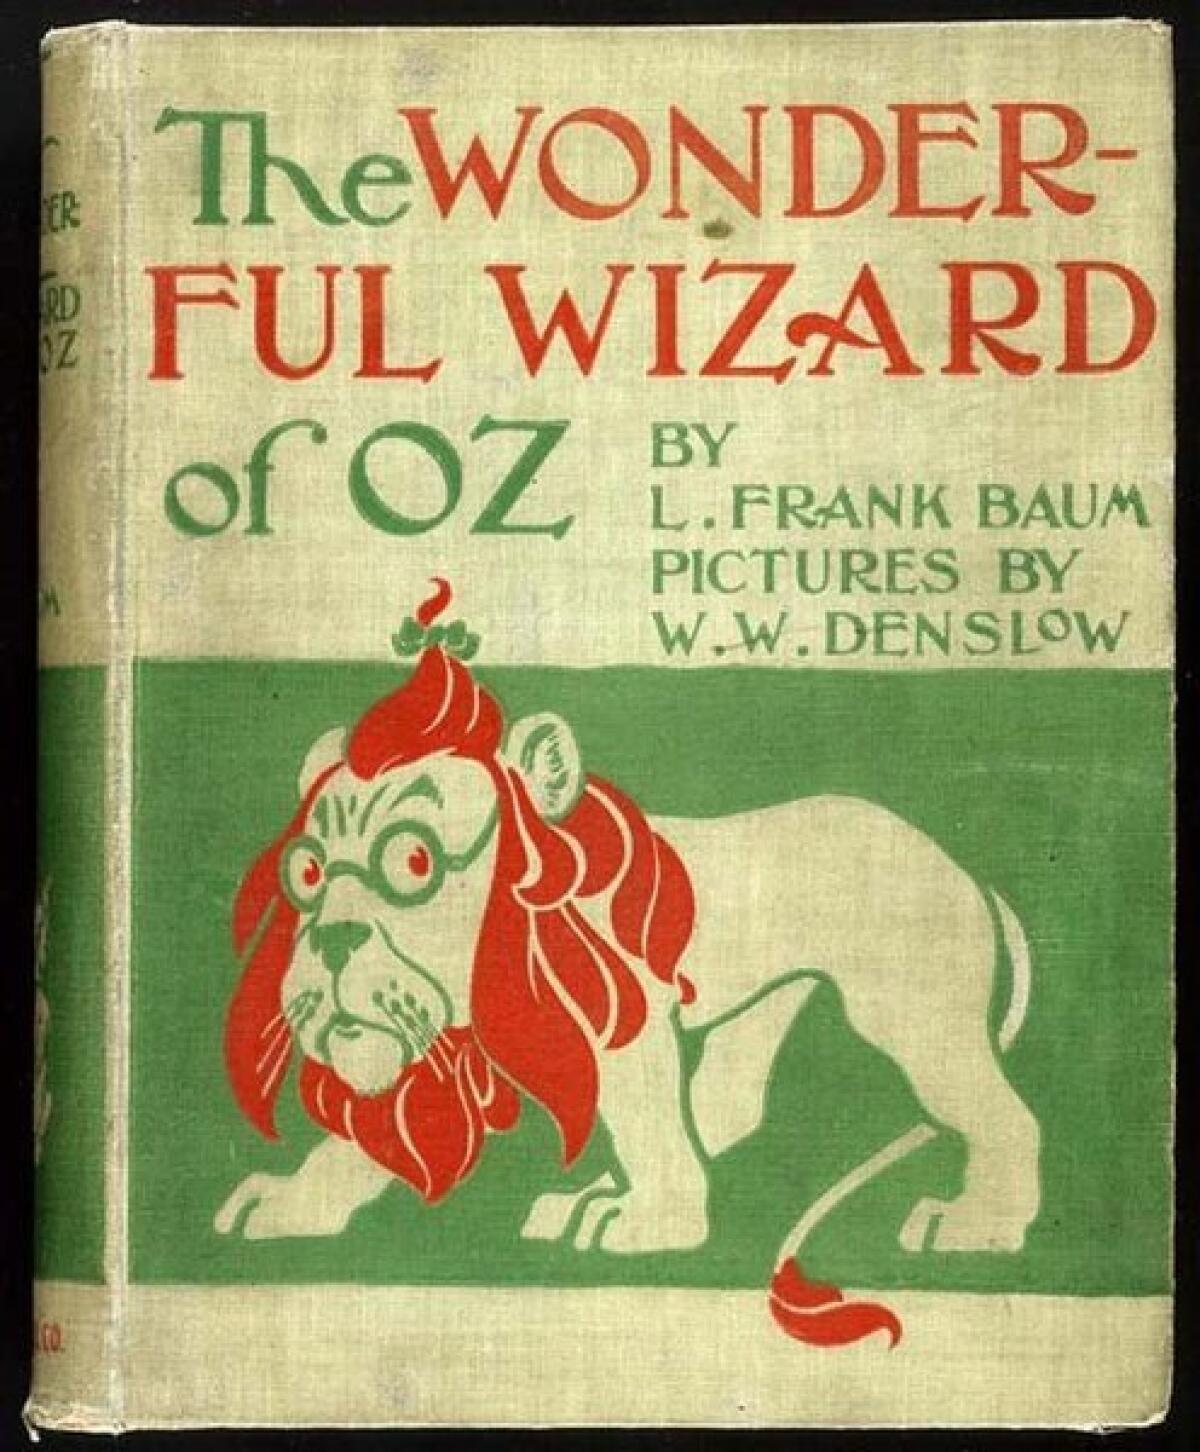 "The Wonderful Wizard of Oz" by L. Frank Baum was published in 1900 with illustrations by W.W. Denslow. Baum had seen little luck on the stage, managing a dry goods store and running a newspaper. He had hits with his versions of the Mother Goose tales, but they were nothing compared to the success of "The Wonderful Wizard of Oz," his "modernized fairy tale."